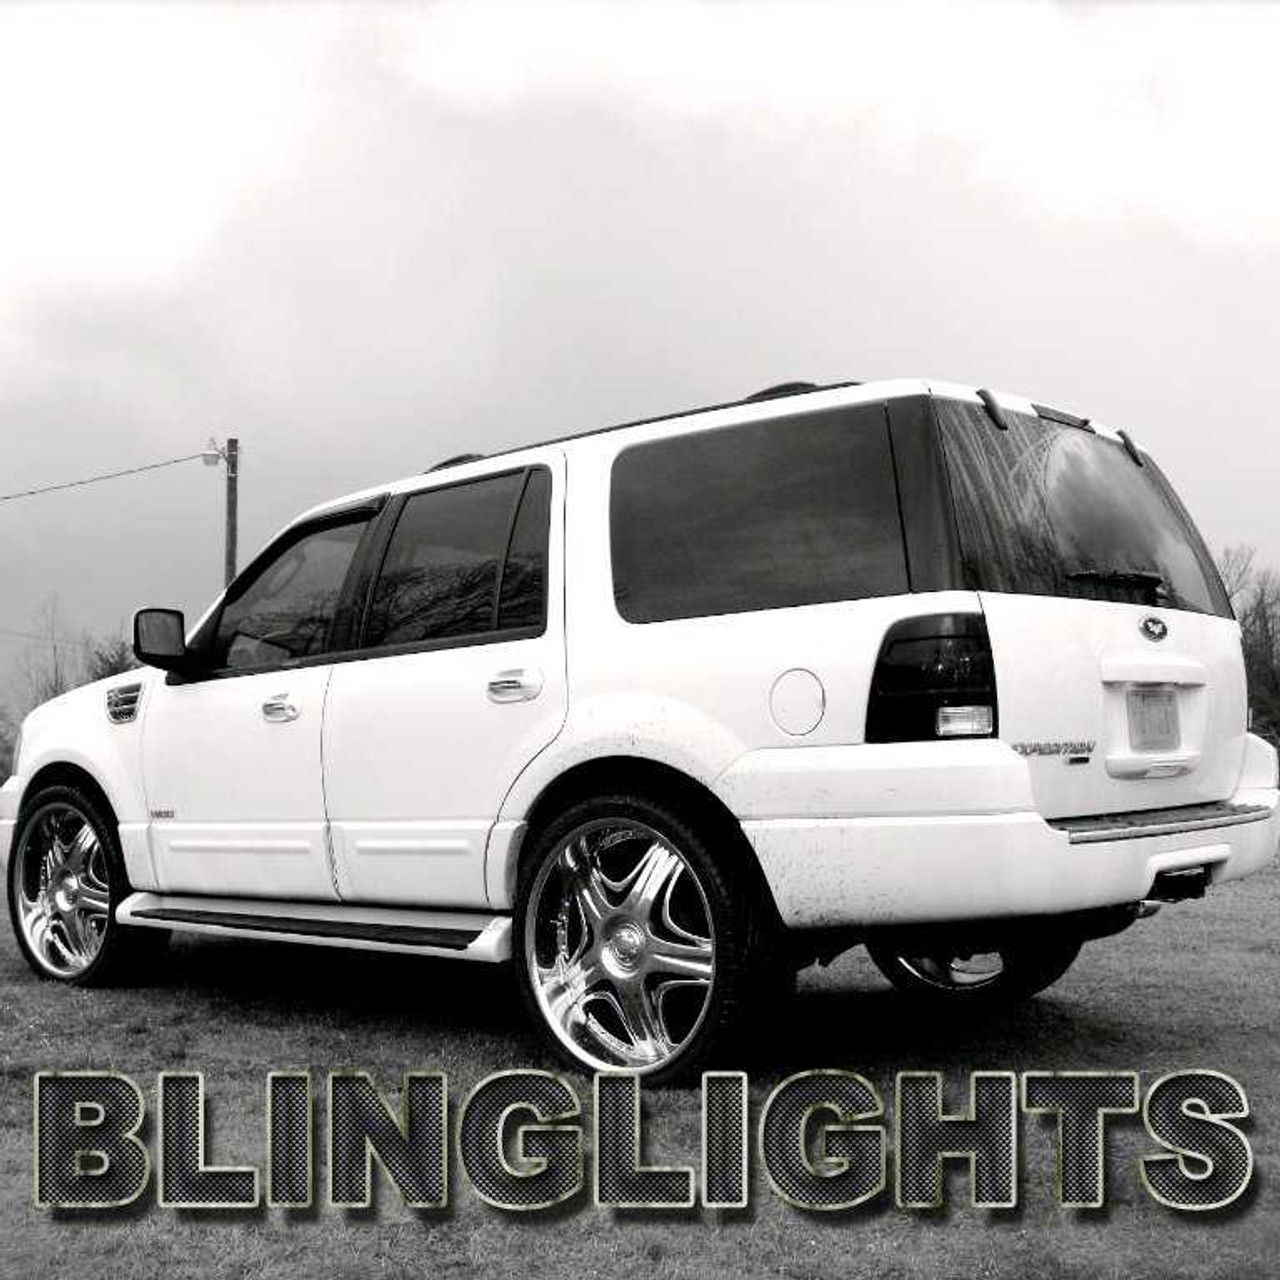 BlingLights Brand Tinted Taillight Film Covers for 1997-2002 Ford Expedition